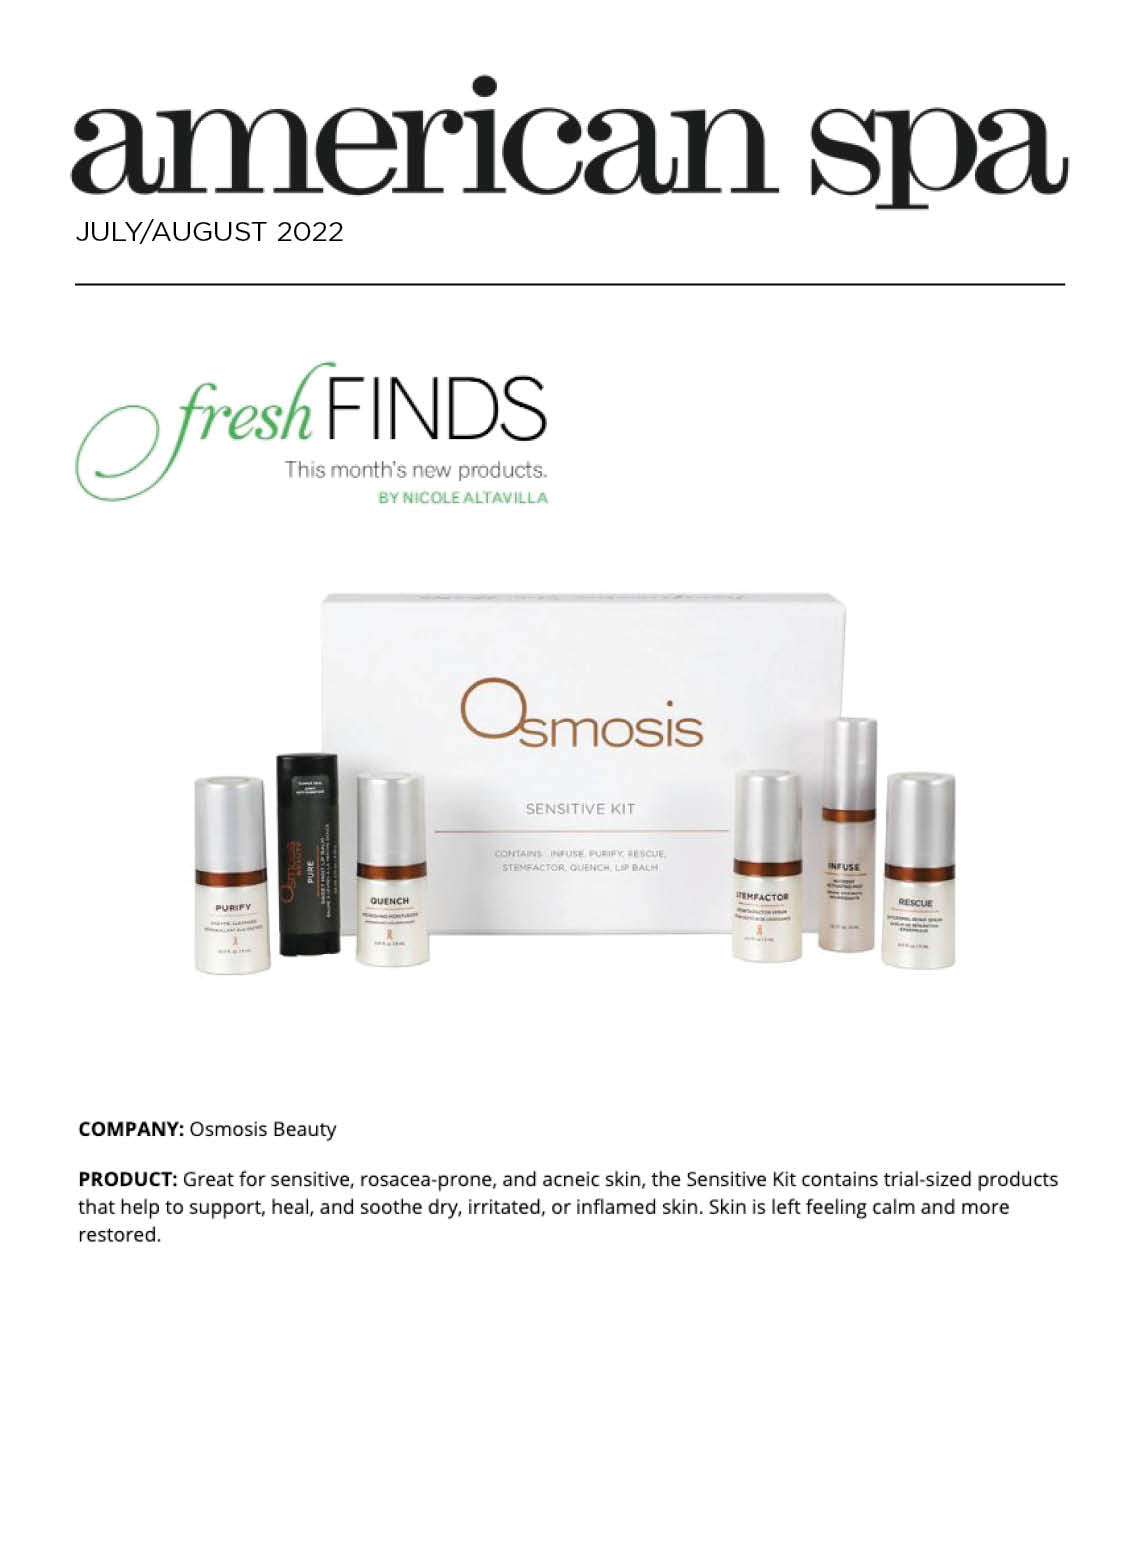 American Spa Magazine included the Sensitive Kit in their July/August issue in the Fresh Finds section